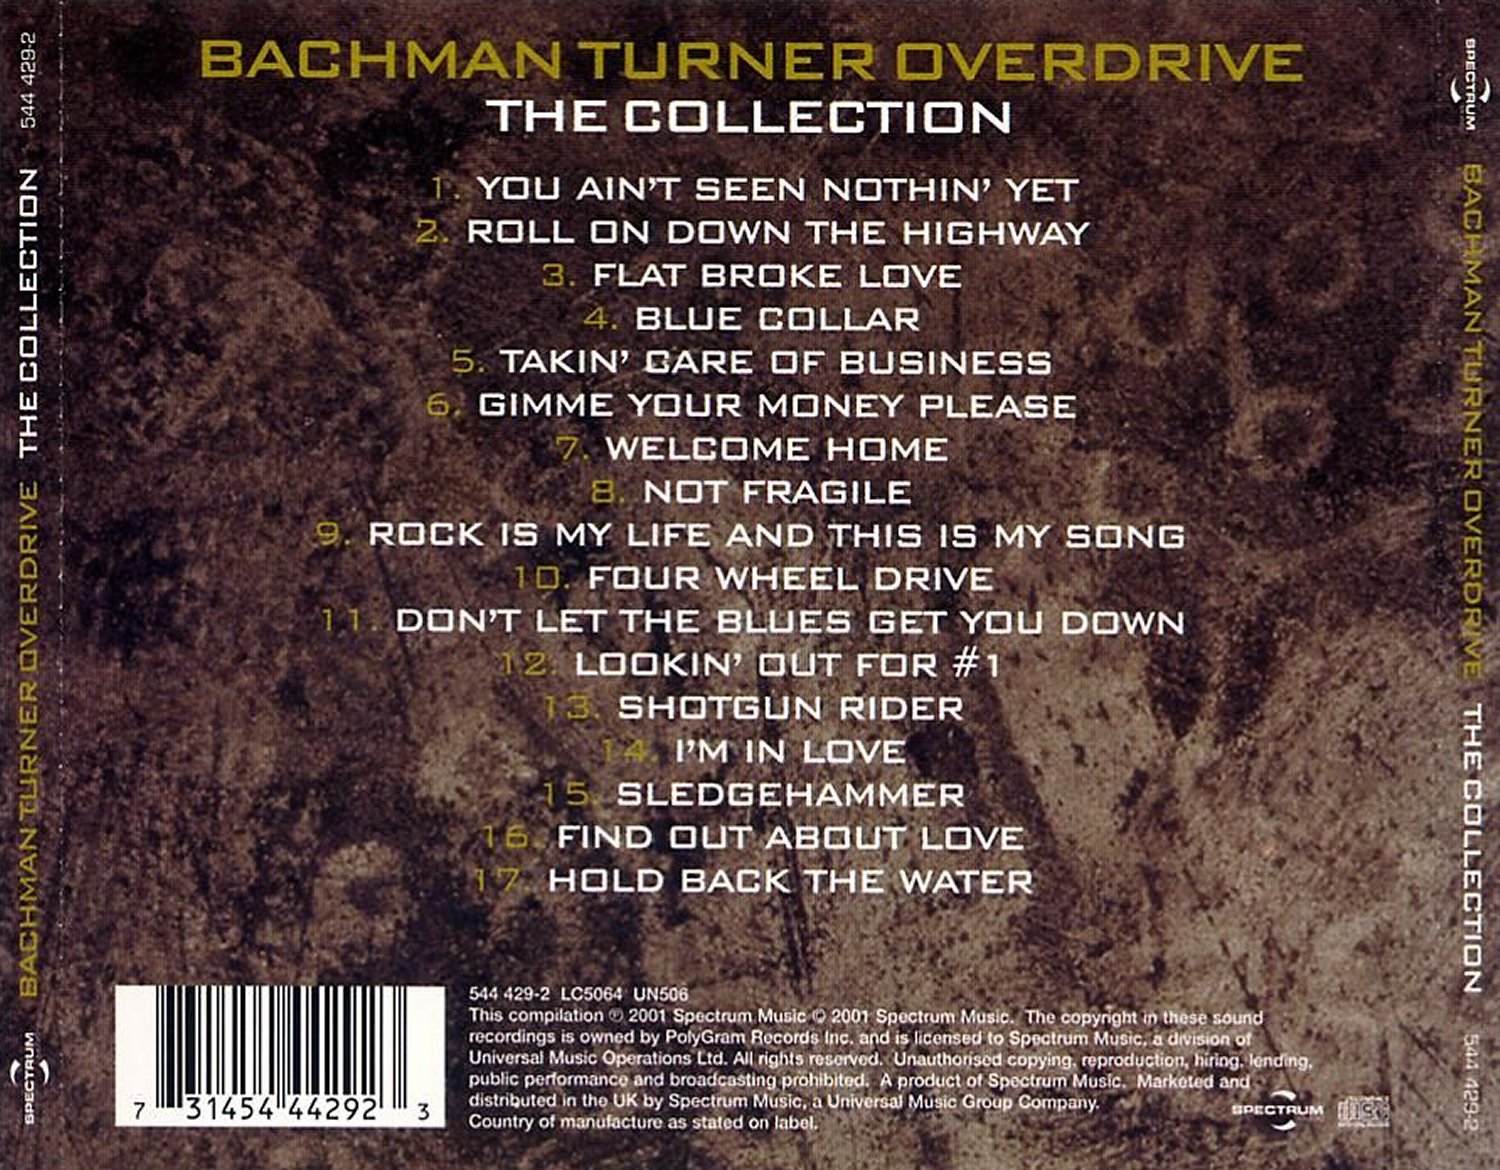 Bachman Turner Overdrive - The Collection